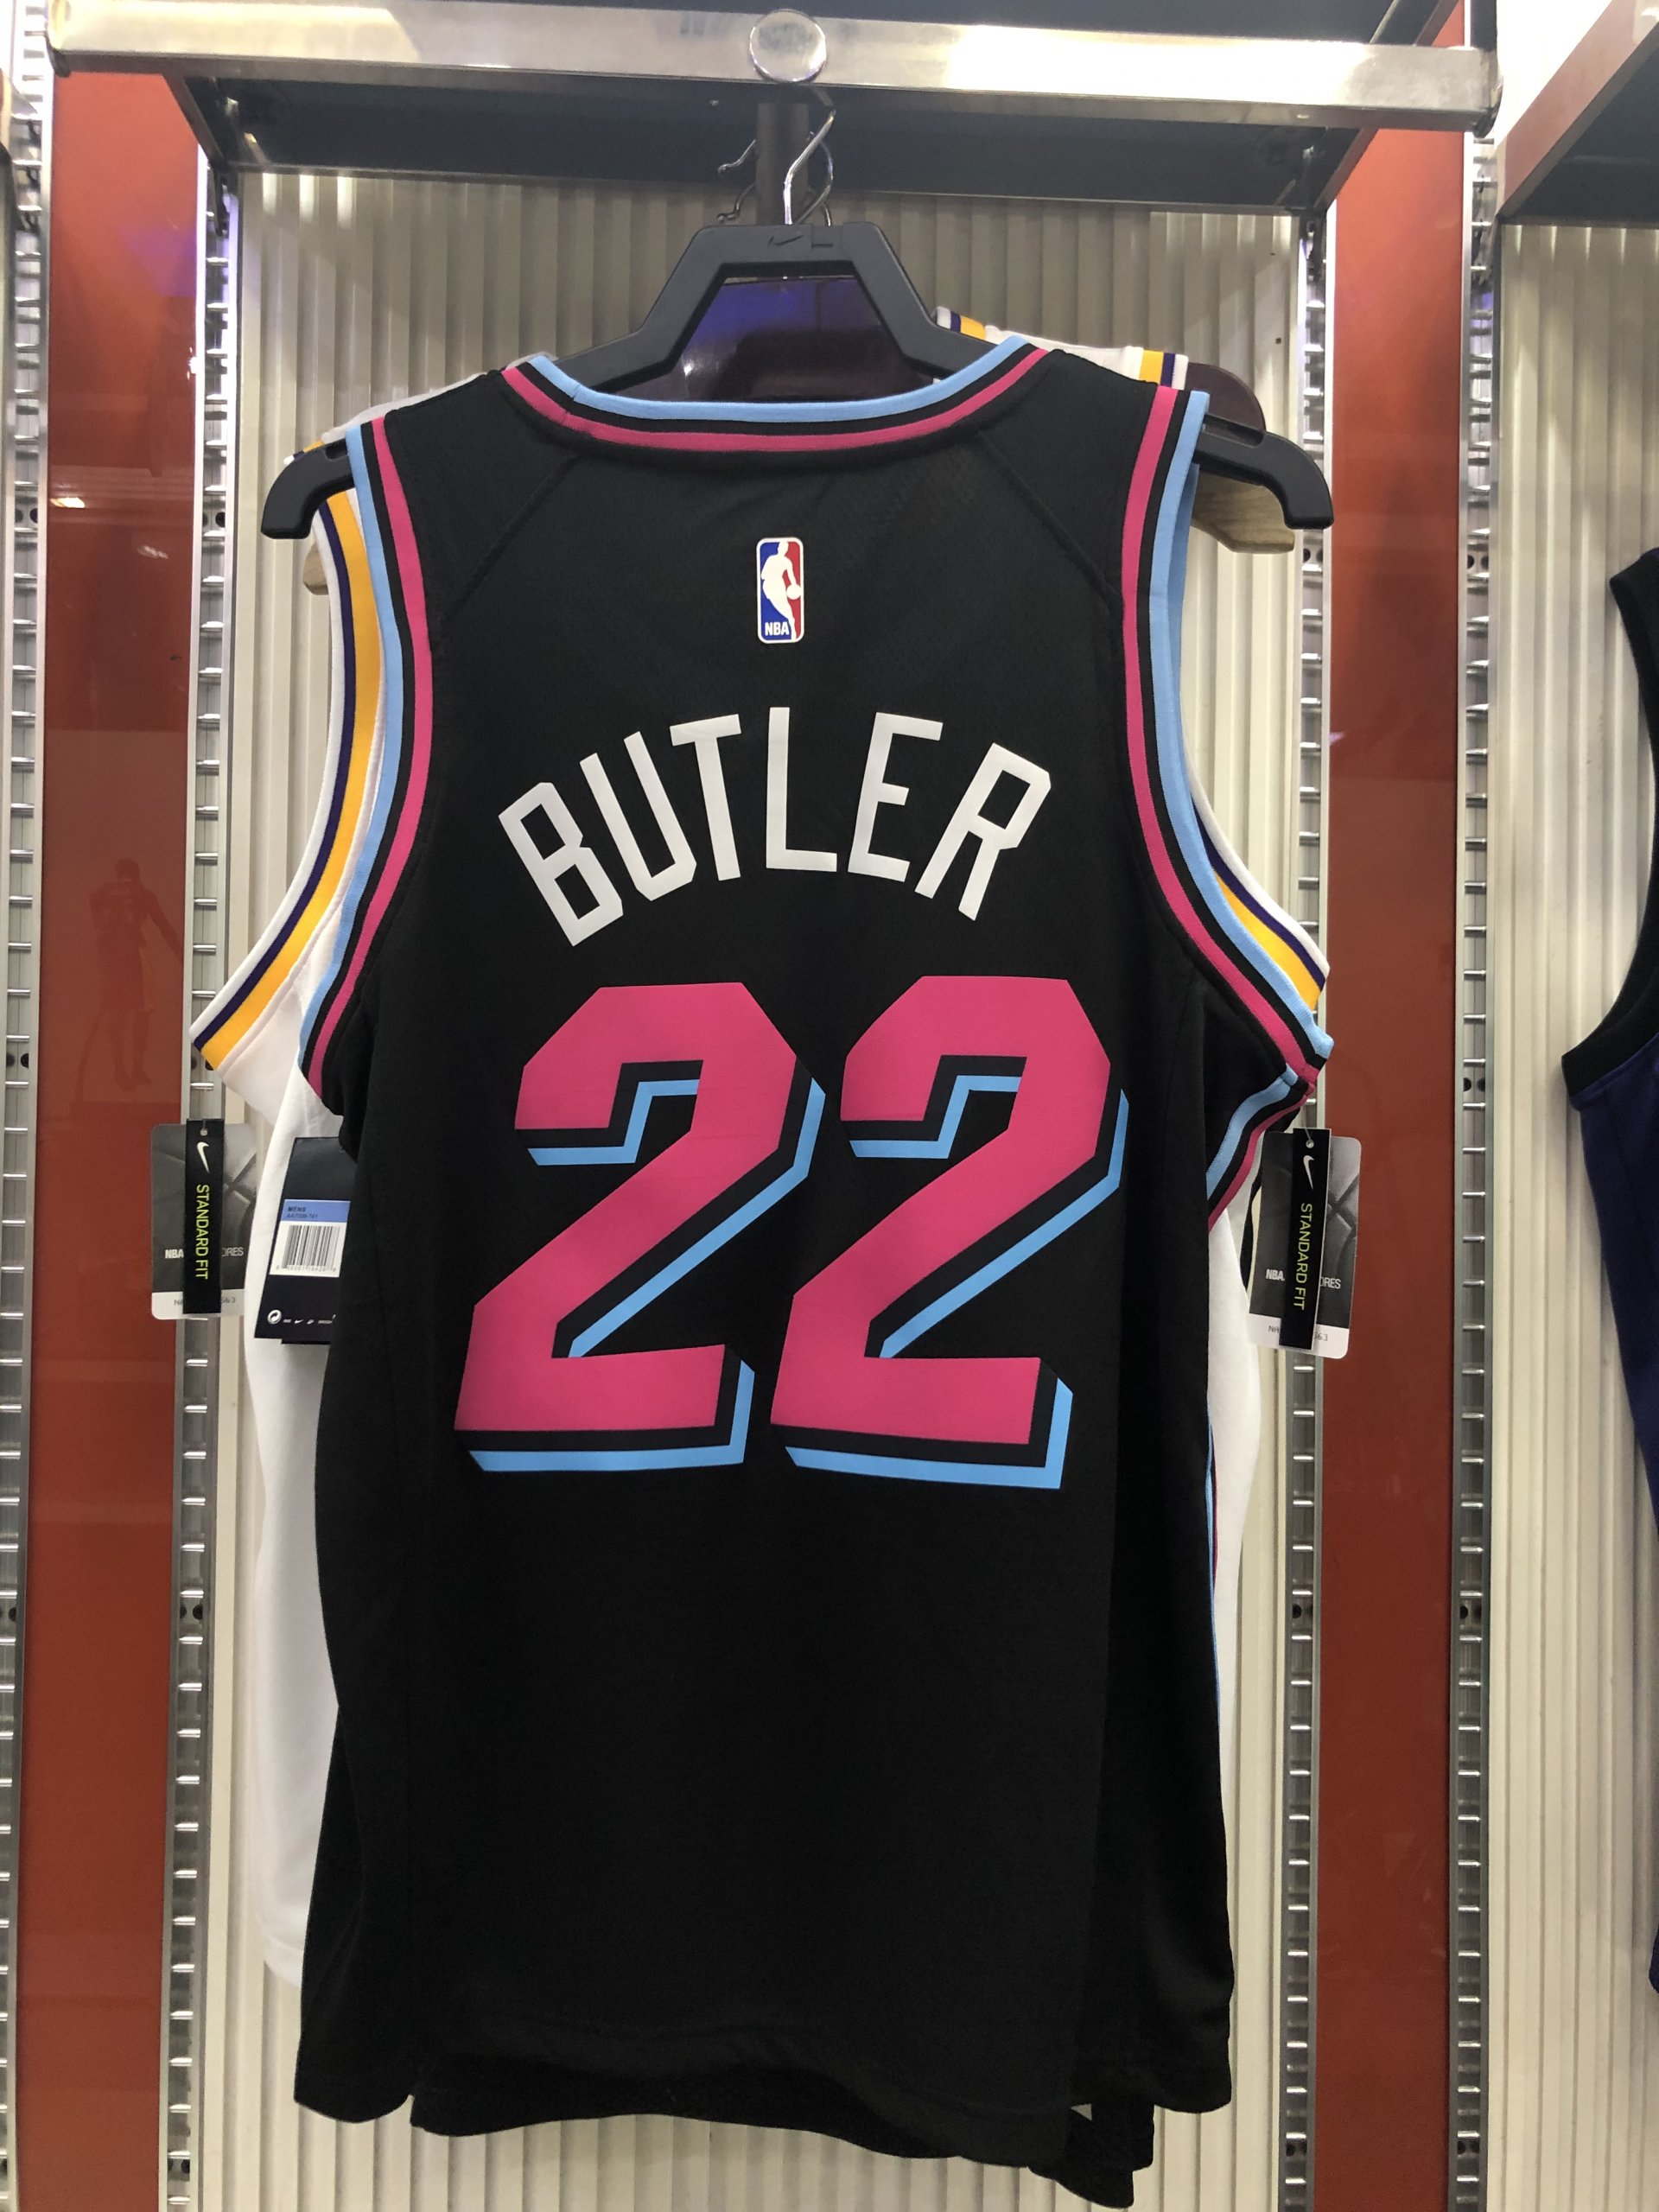 Jimmy Butler Miami Vice Wave Jersey 22 - Jimmy Butler Miami Heat